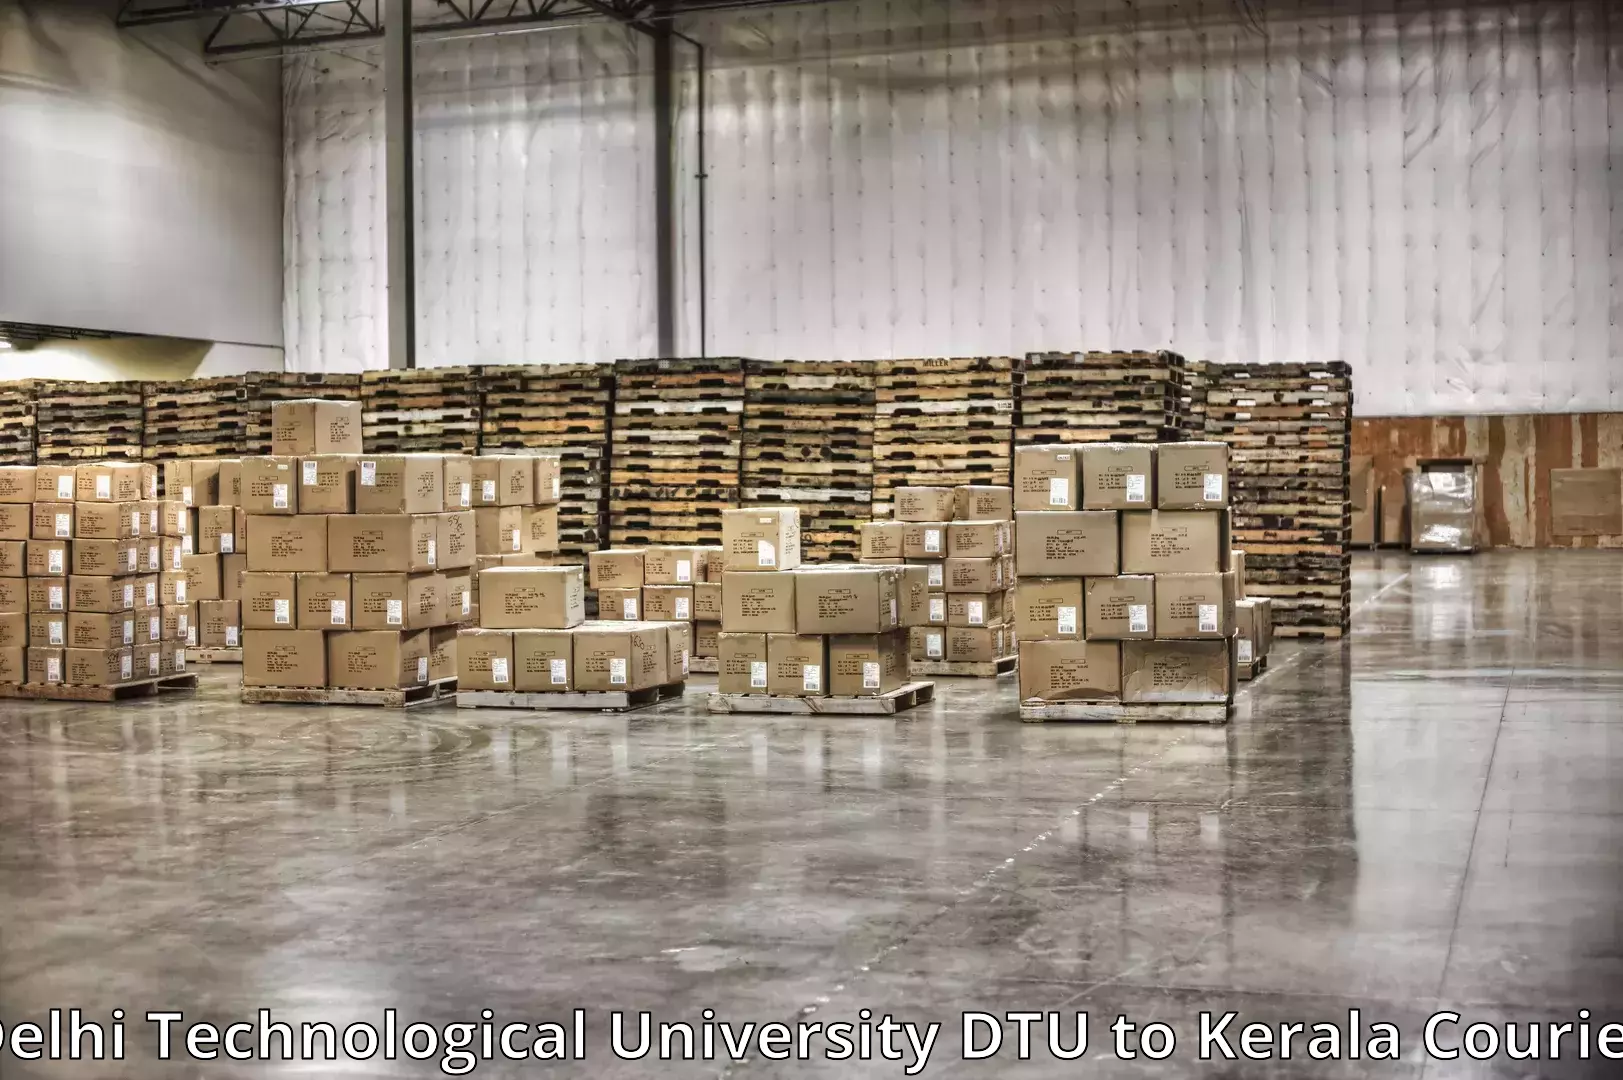 Professional packing services Delhi Technological University DTU to Payyanur